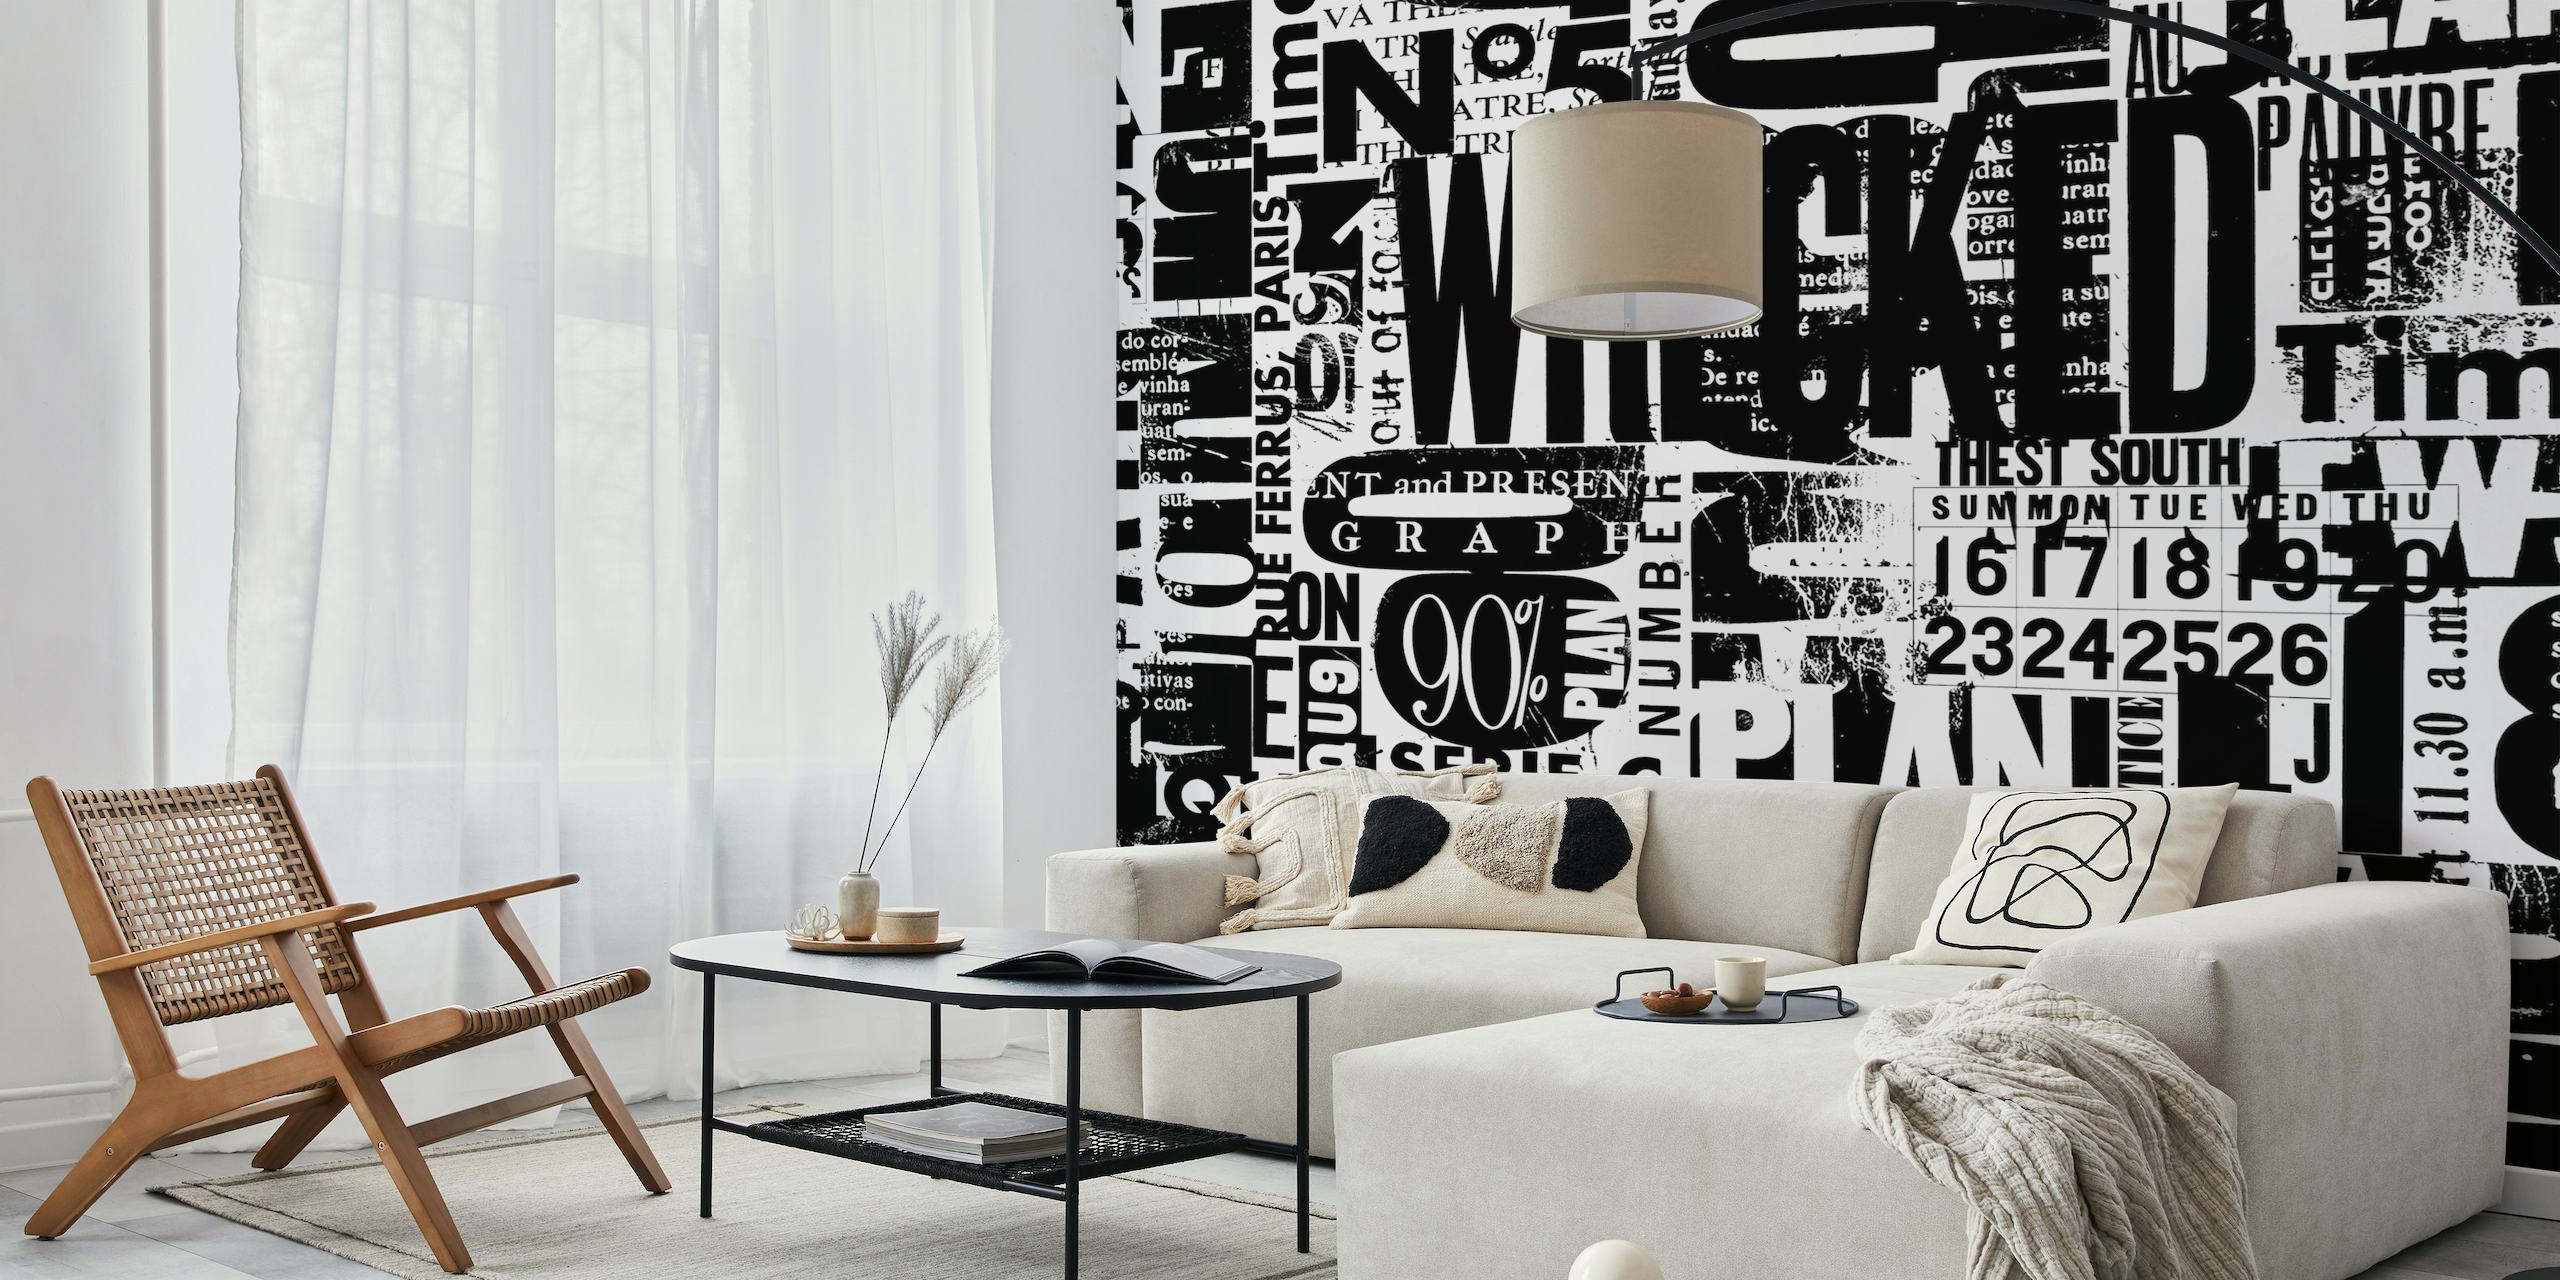 Black and white urban style grunge typographic wall mural featuring a collage of letters and numbers.